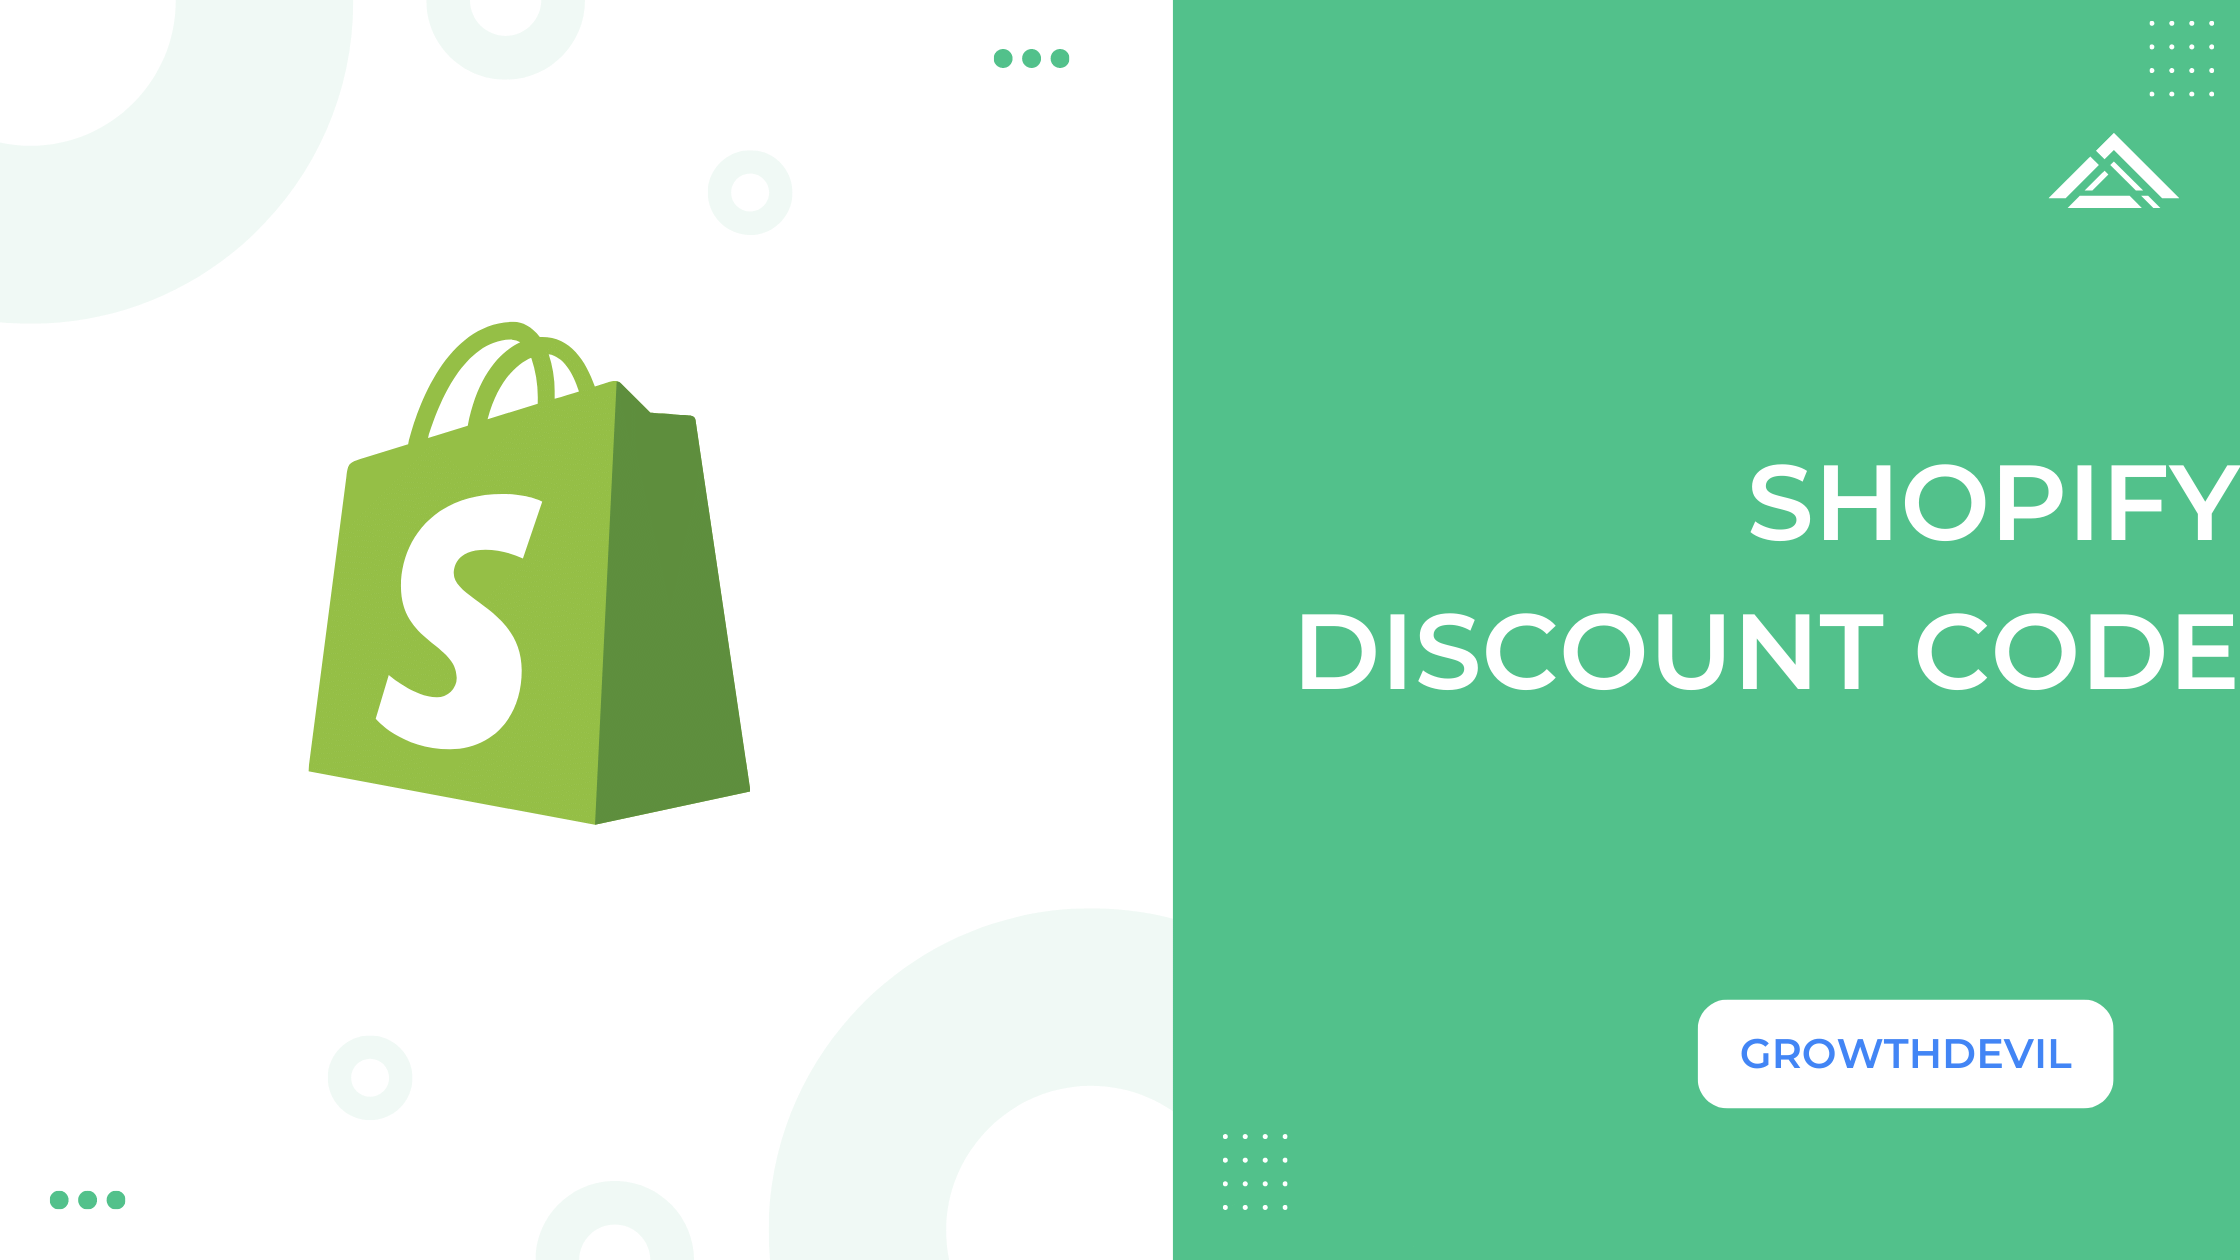 Shopify Discount Code - GrowthDevil